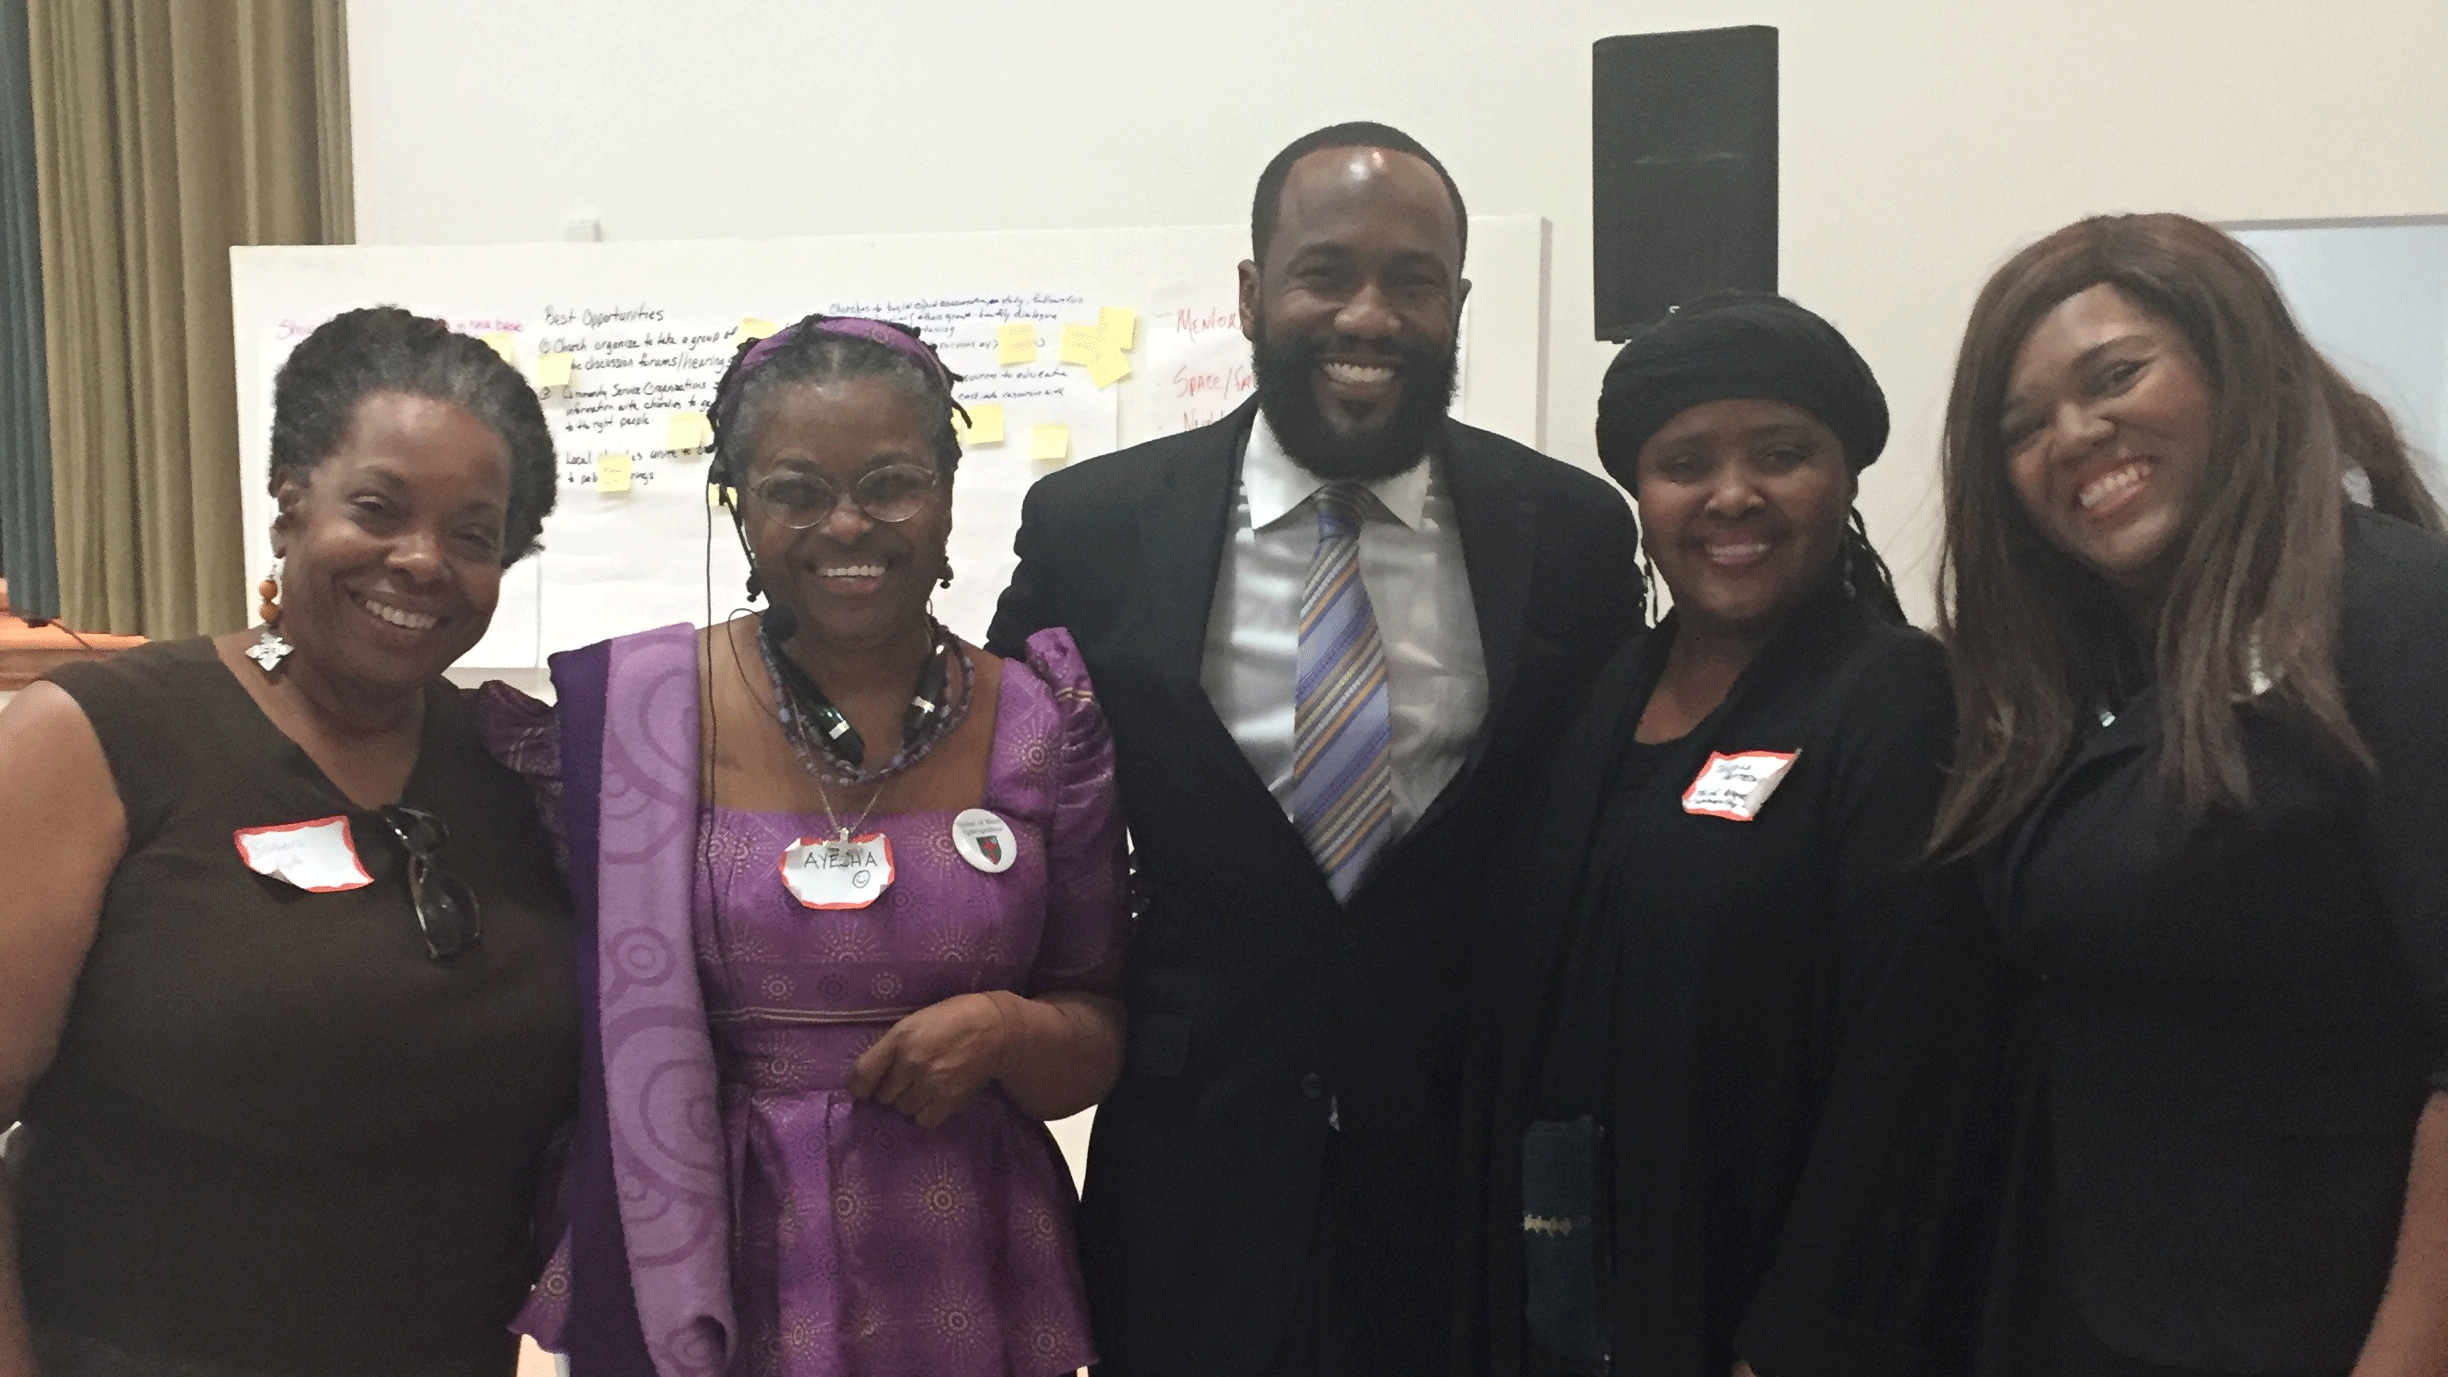 Ayesha-Mutope-Johnson-and-Theola-Petty-pose-with-forum-attendees.gif